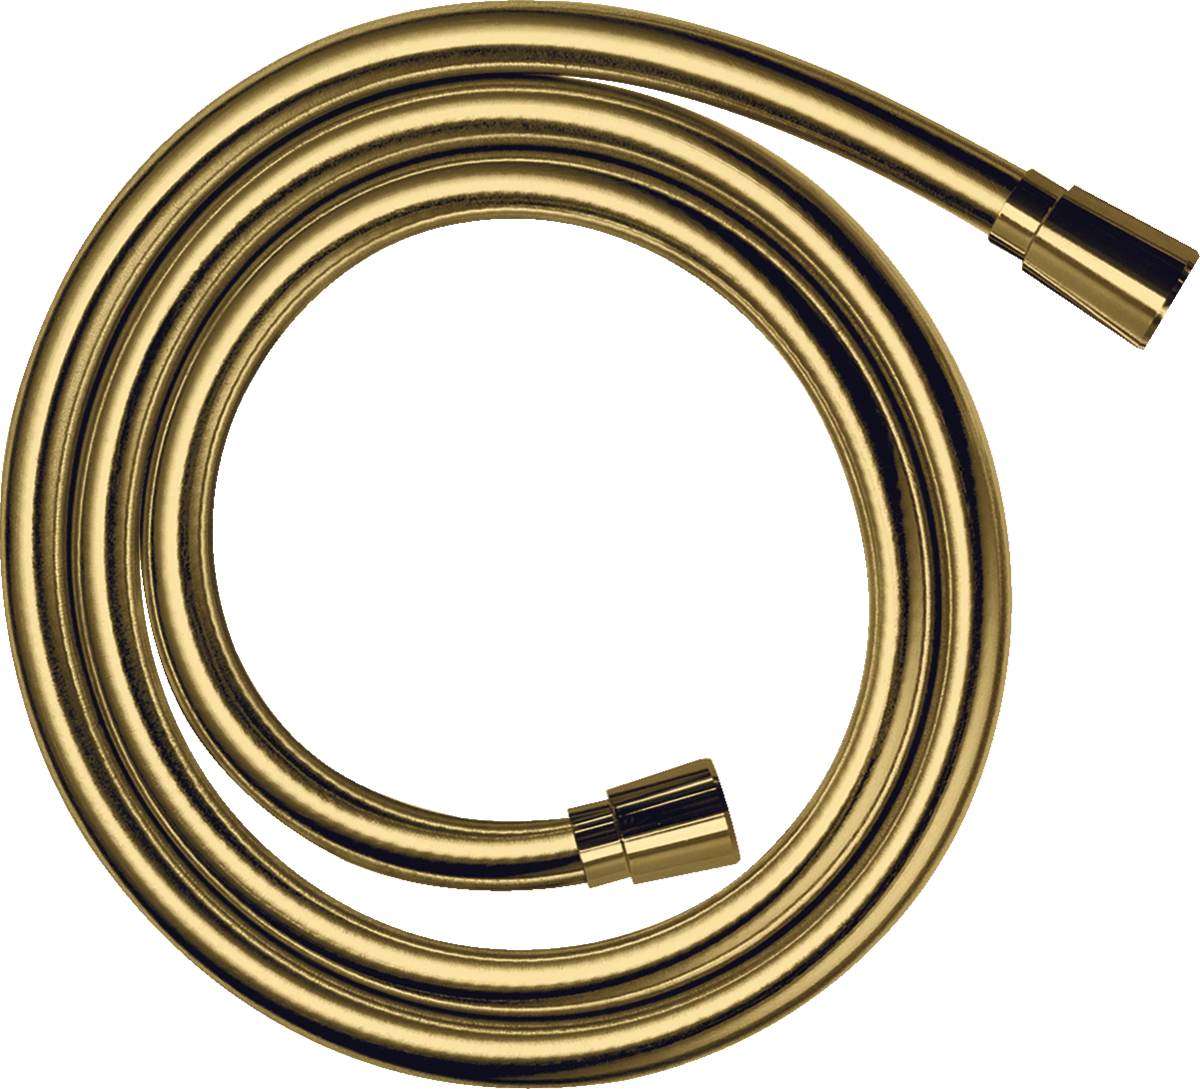 Picture of HANSGROHE Isiflex Shower hose 160 cm #28276990 - Polished Gold Optic